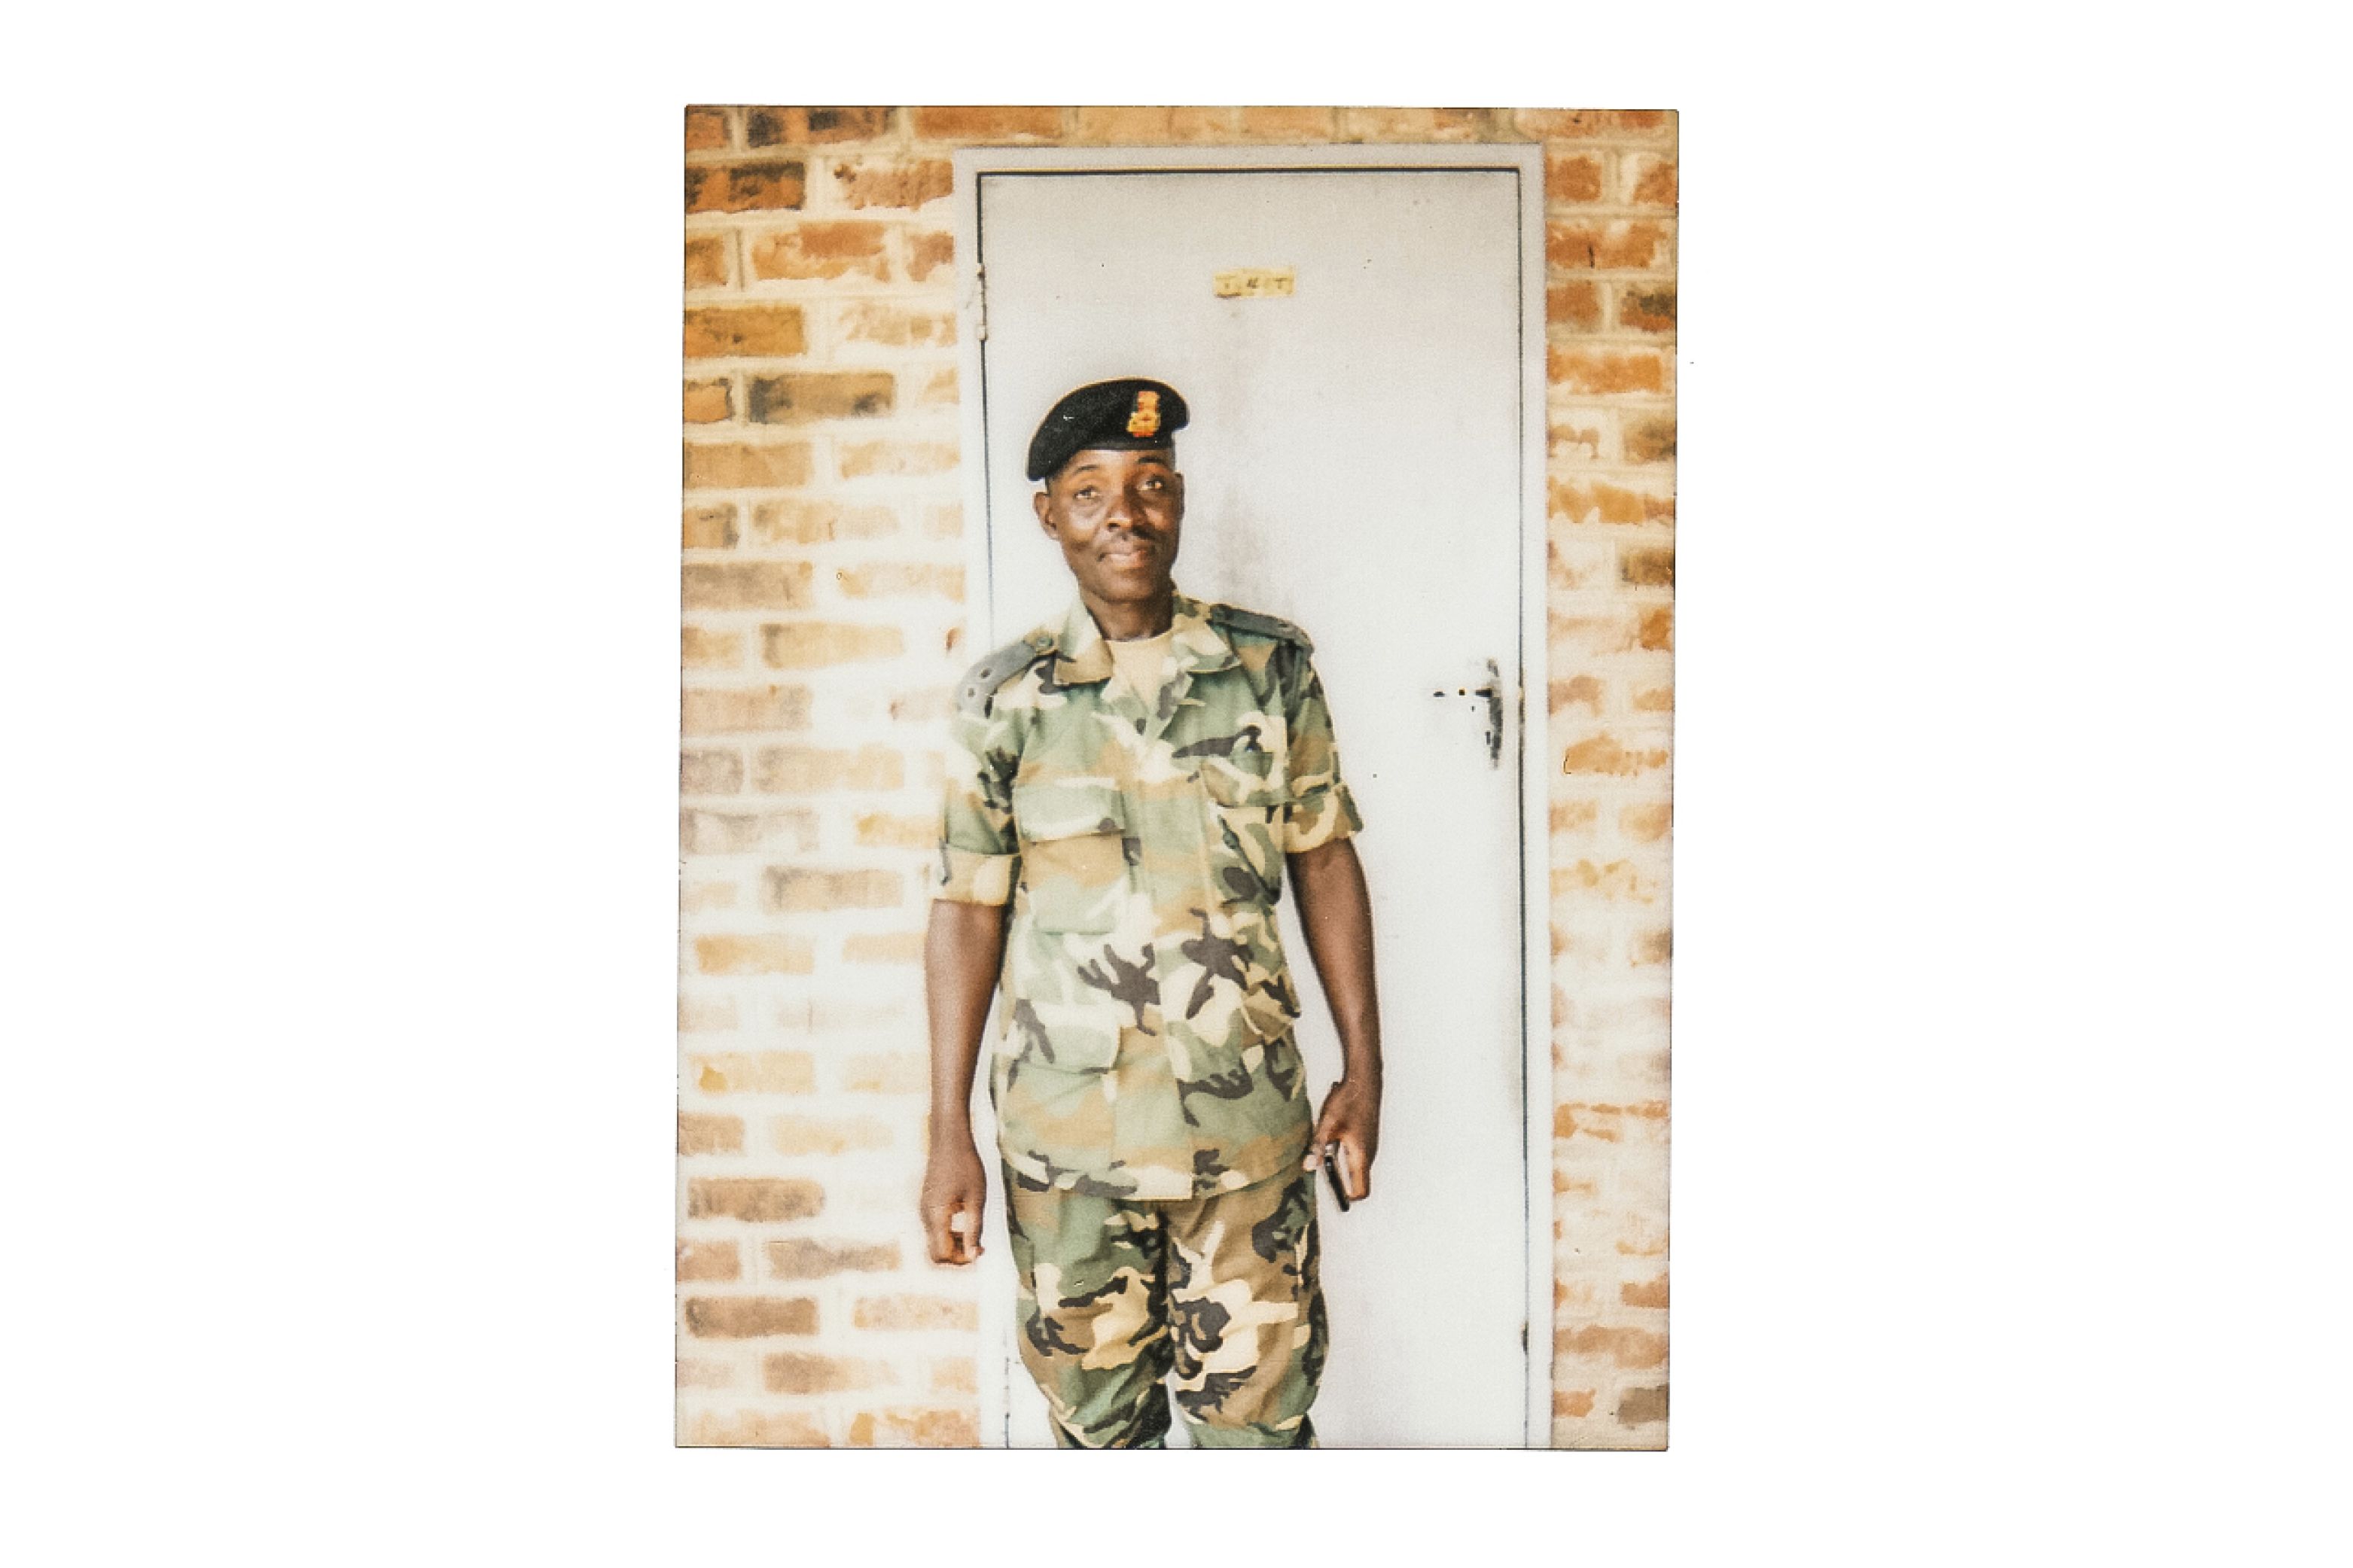 The Malawi Defense Forces have been deployed to Dzalanyama forest reserve close to Lilongwe and other important reserves to protect the woods from being plundered for illegal charcoal and firewood collection. Image by Nathalie Bertrams. Malawi, 2017.